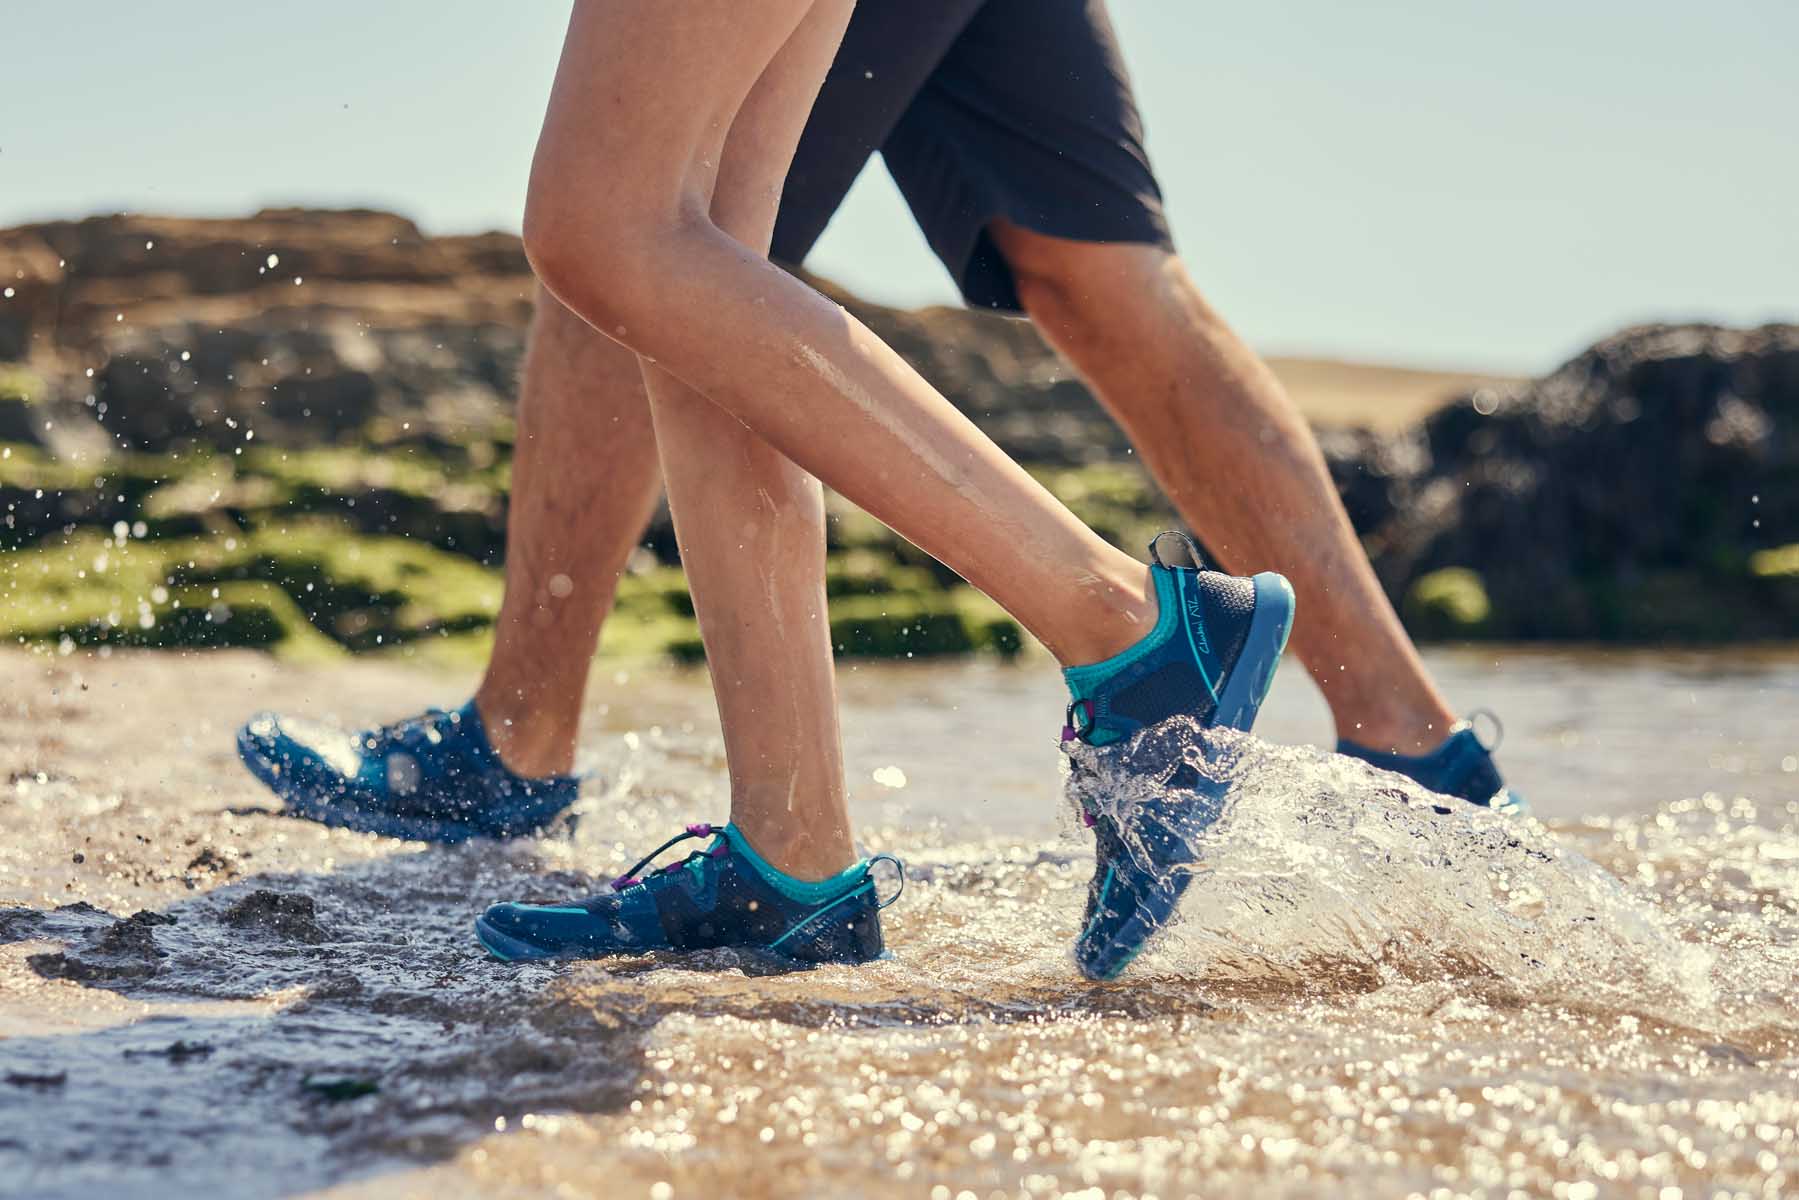 Two people walking on the beach wearing blue aqua shoes